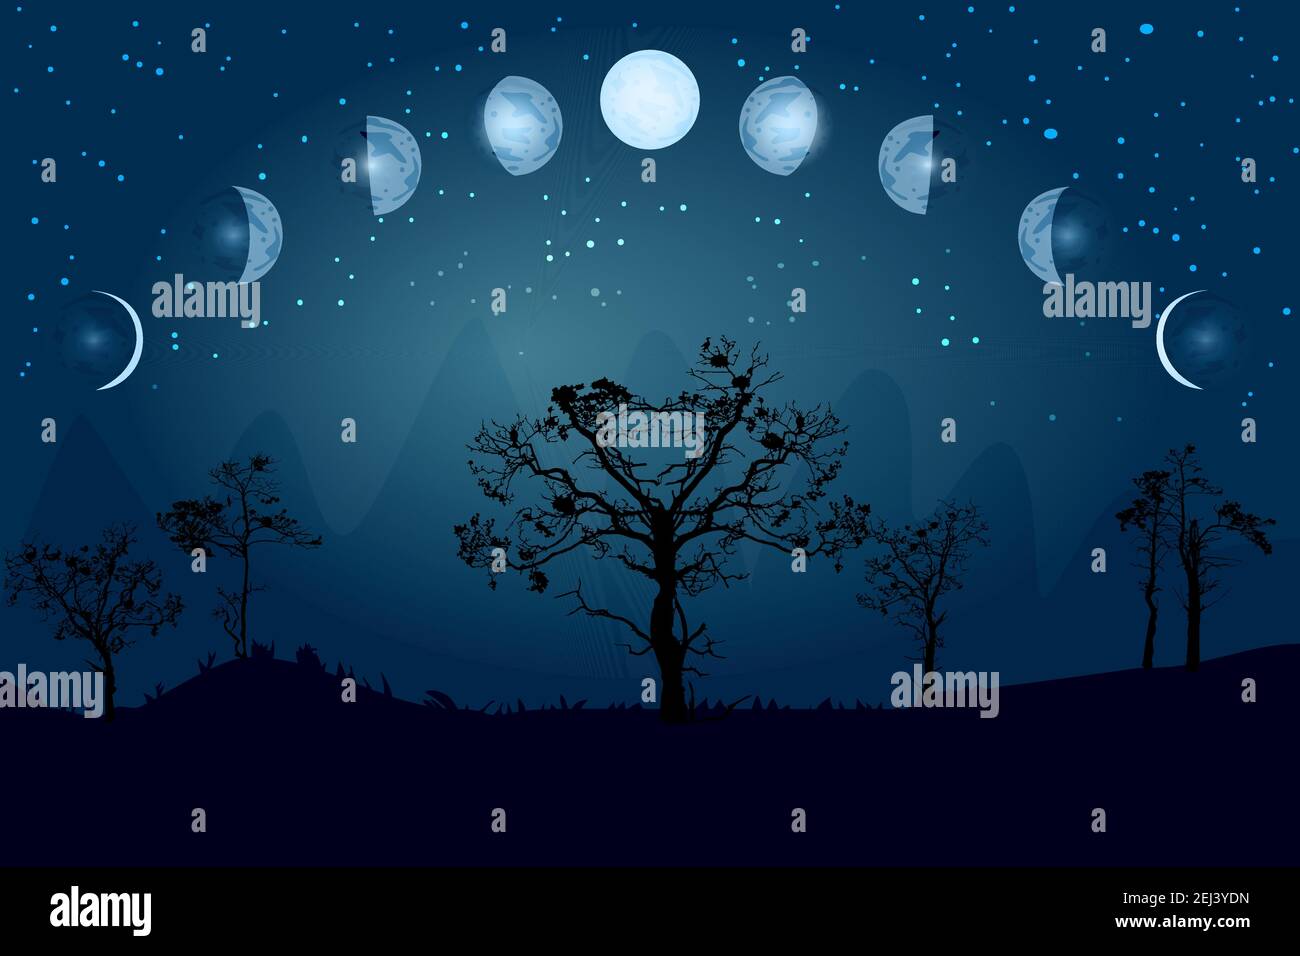 Background 2/6 - Lunar Phases - NAAP